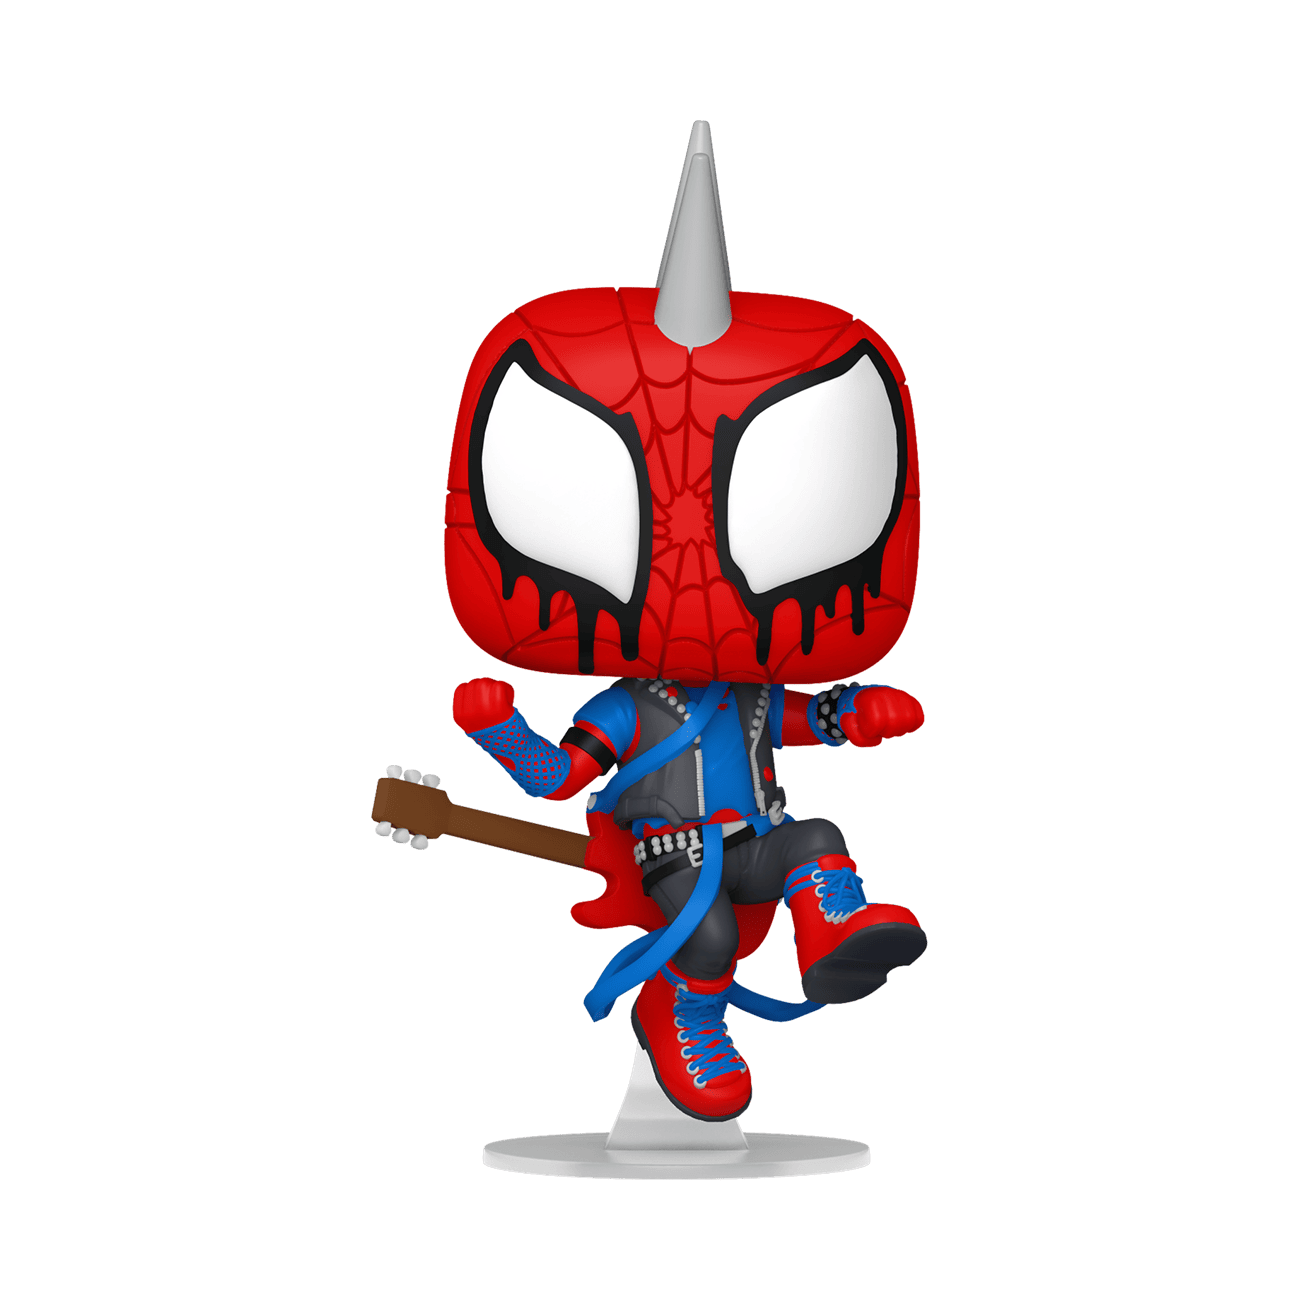 The Funko exclusive Pop! Spider-Punk from Spider-Man: Across the Spider-Verse.